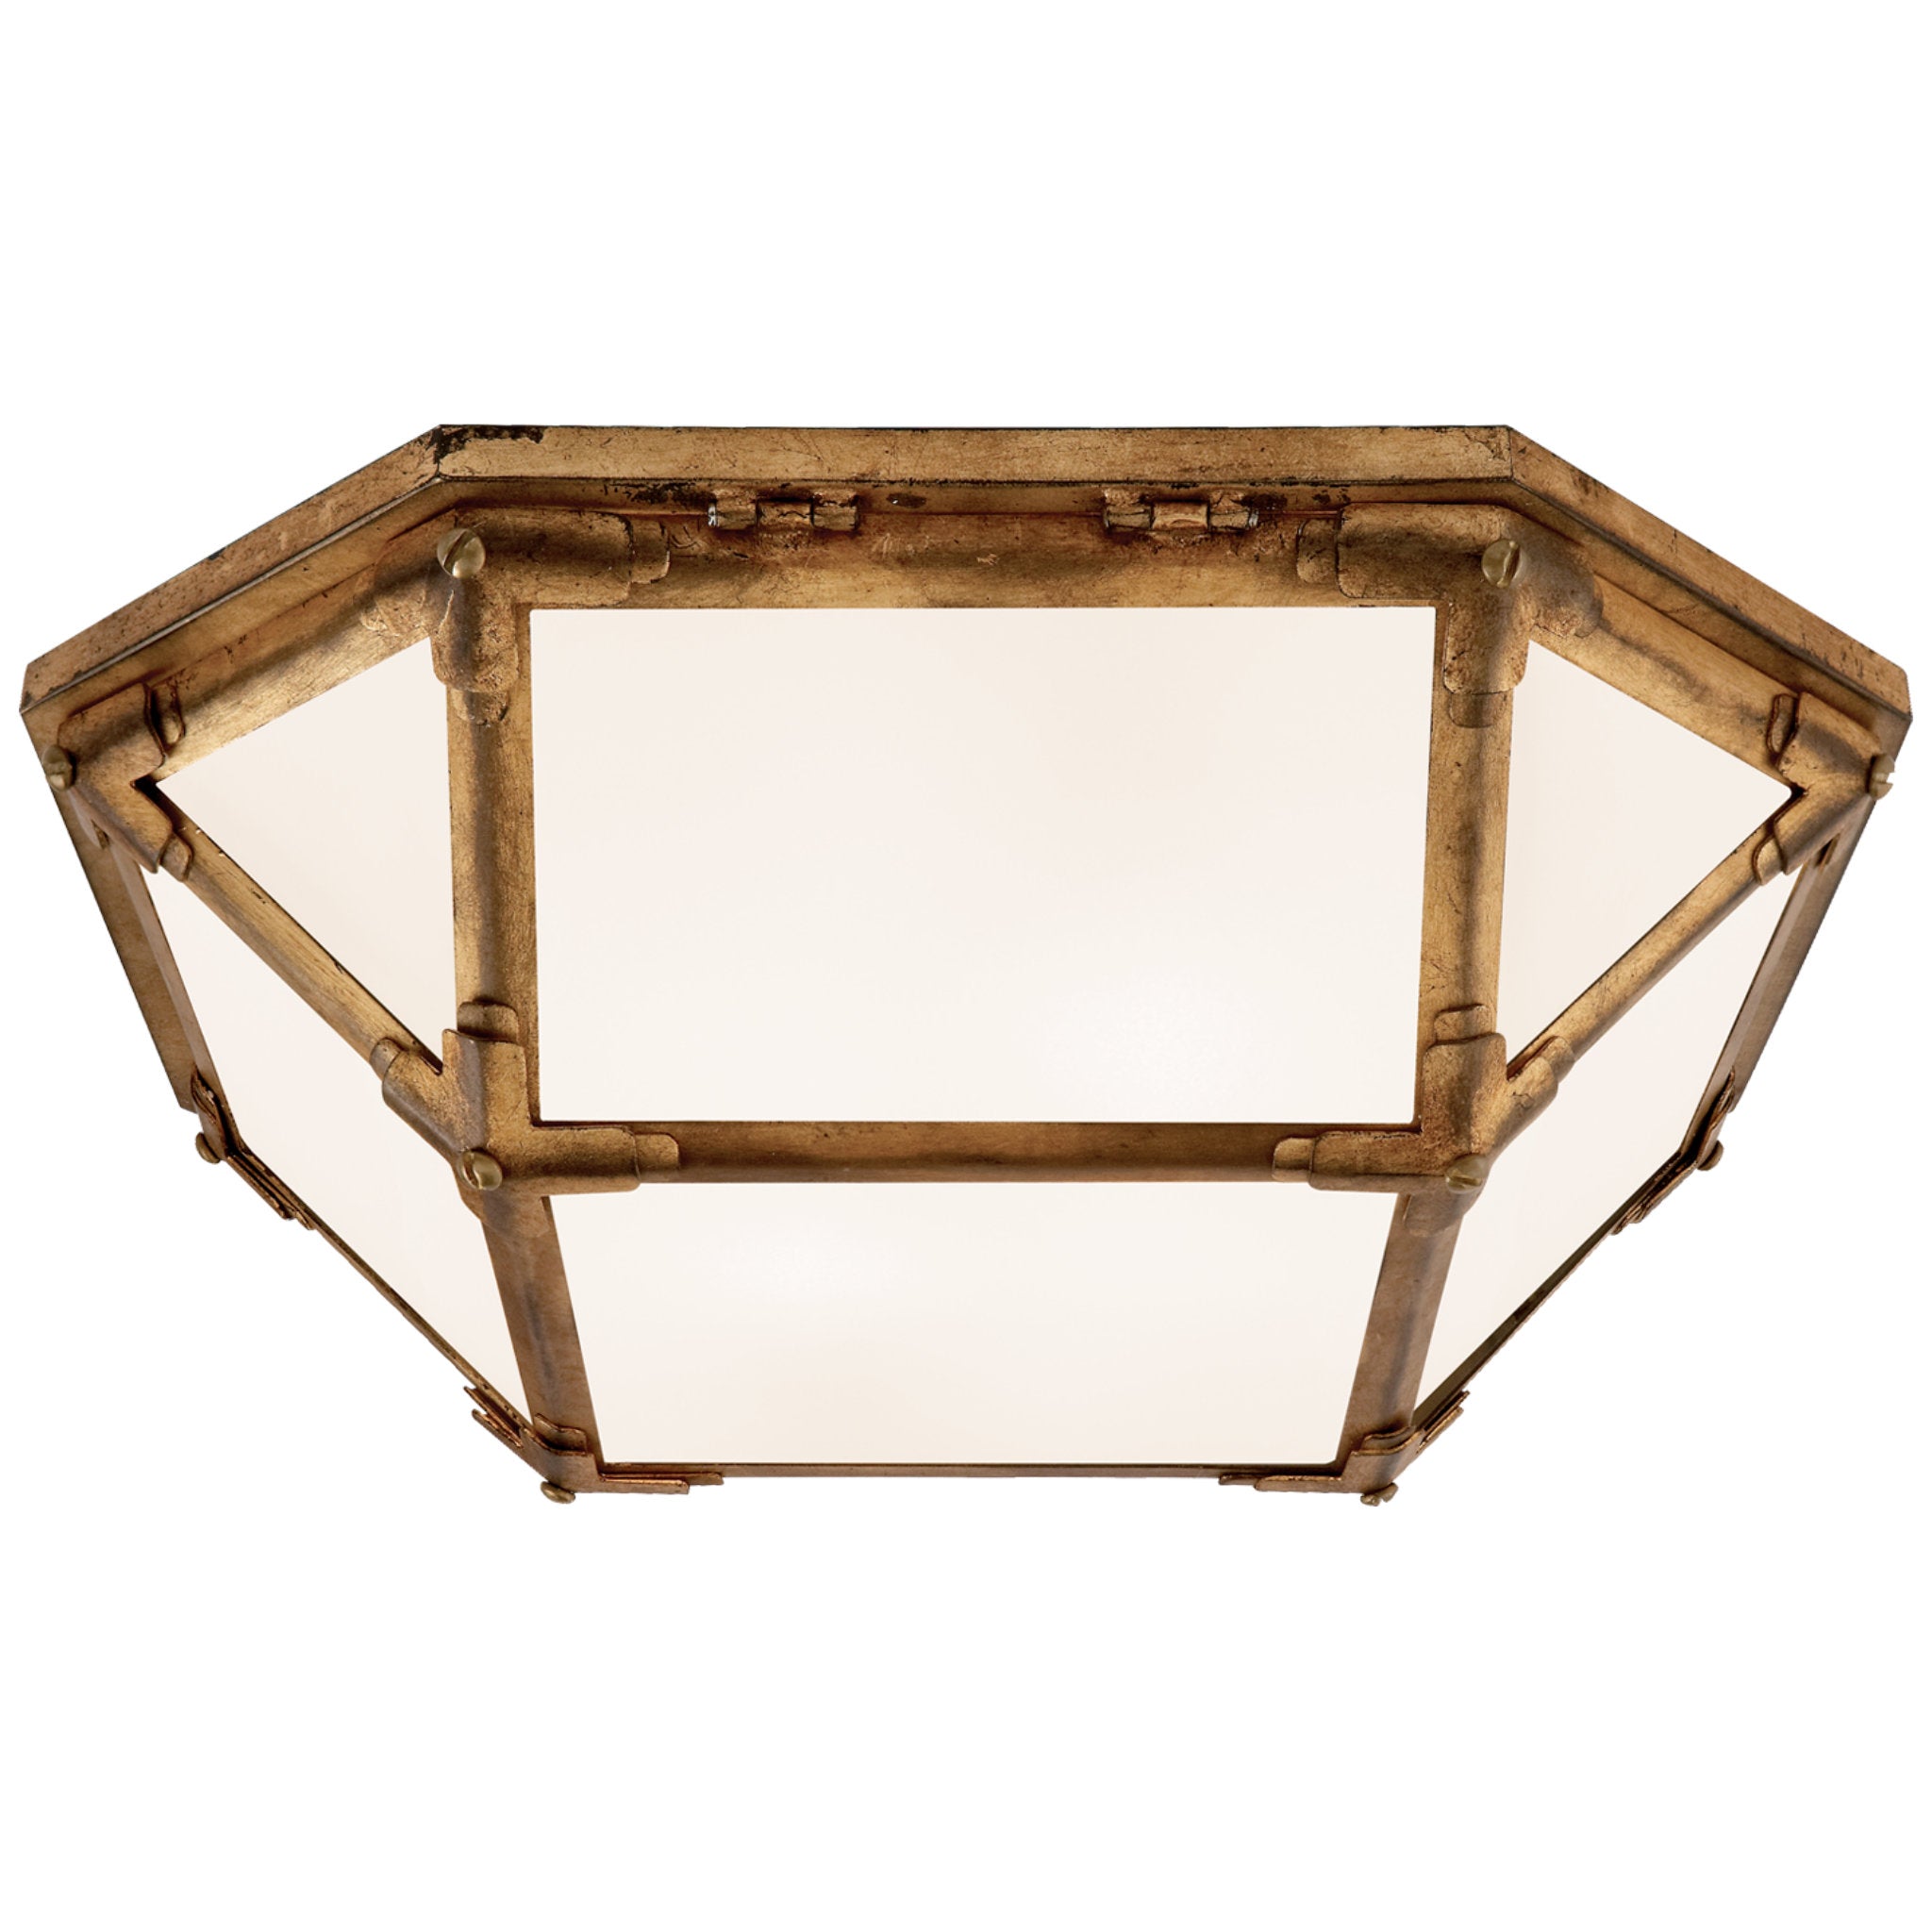 Suzanne Kasler Morris Flush Mount in Gilded Iron with White Glass